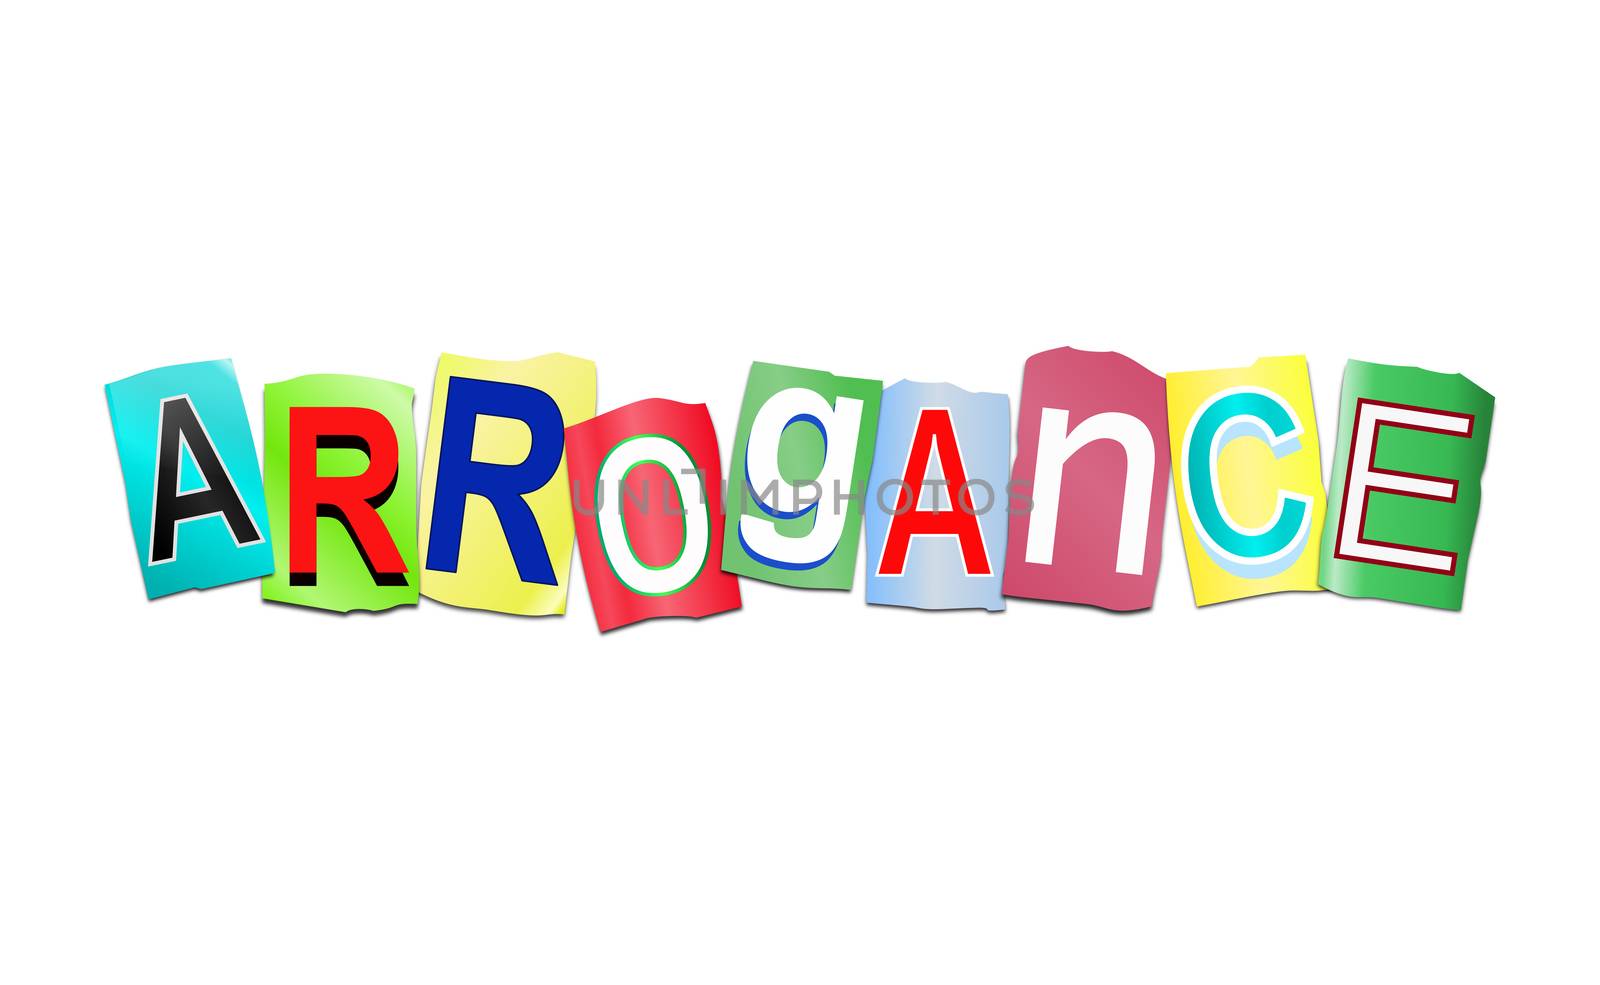 Illustration depicting a set of cut out printed letters arranged to form the word arrogance.